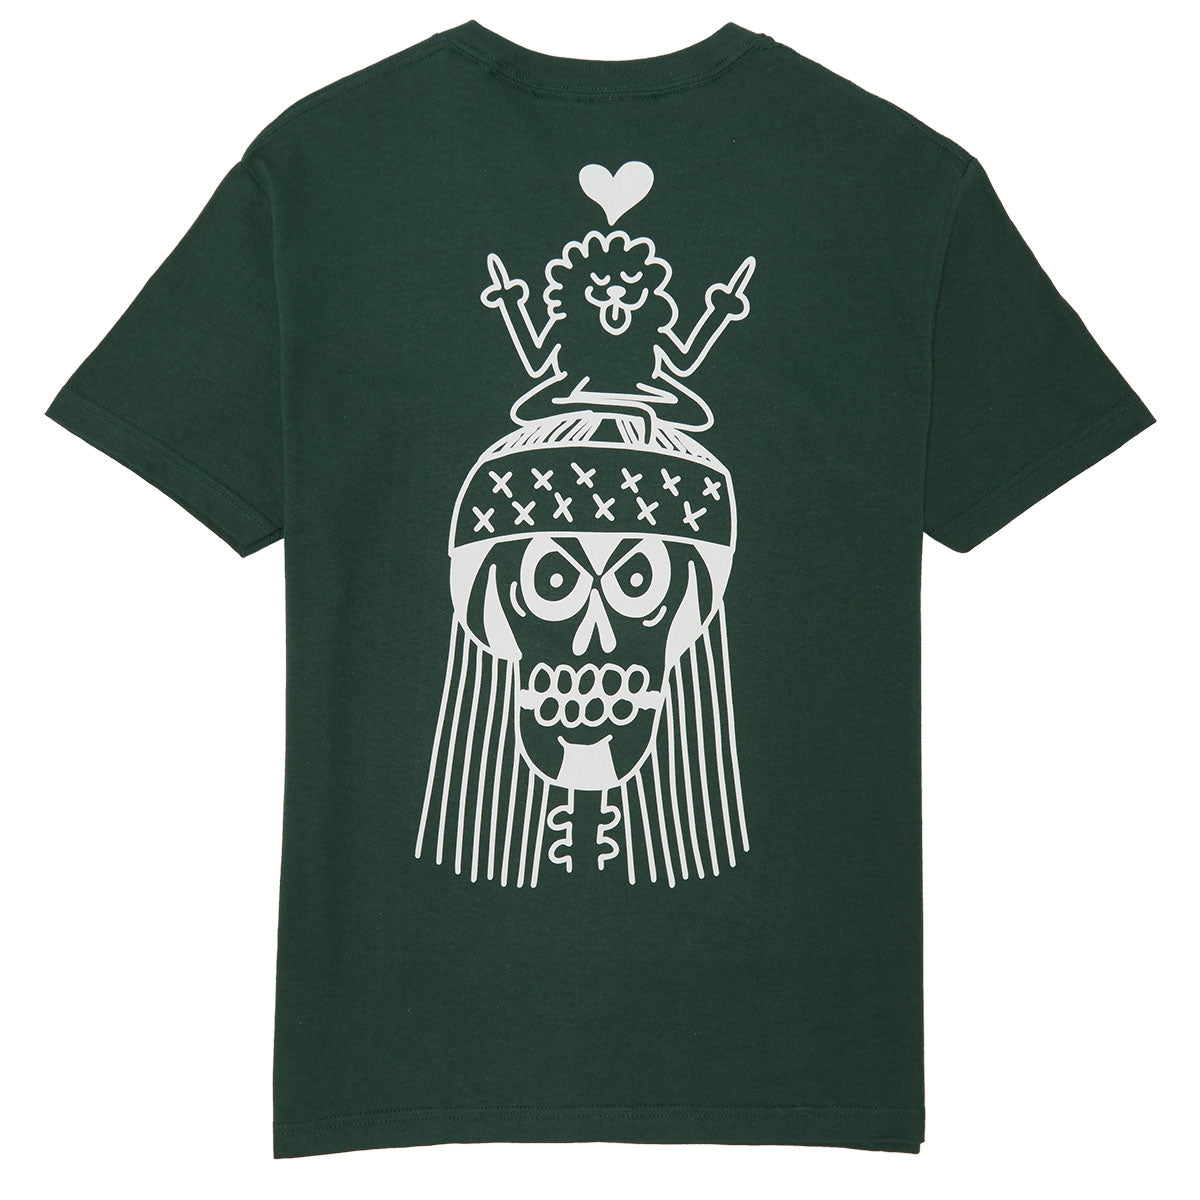 The Quiet Life x Jay Howell Doodle T-Shirt - Hunter Green image 1